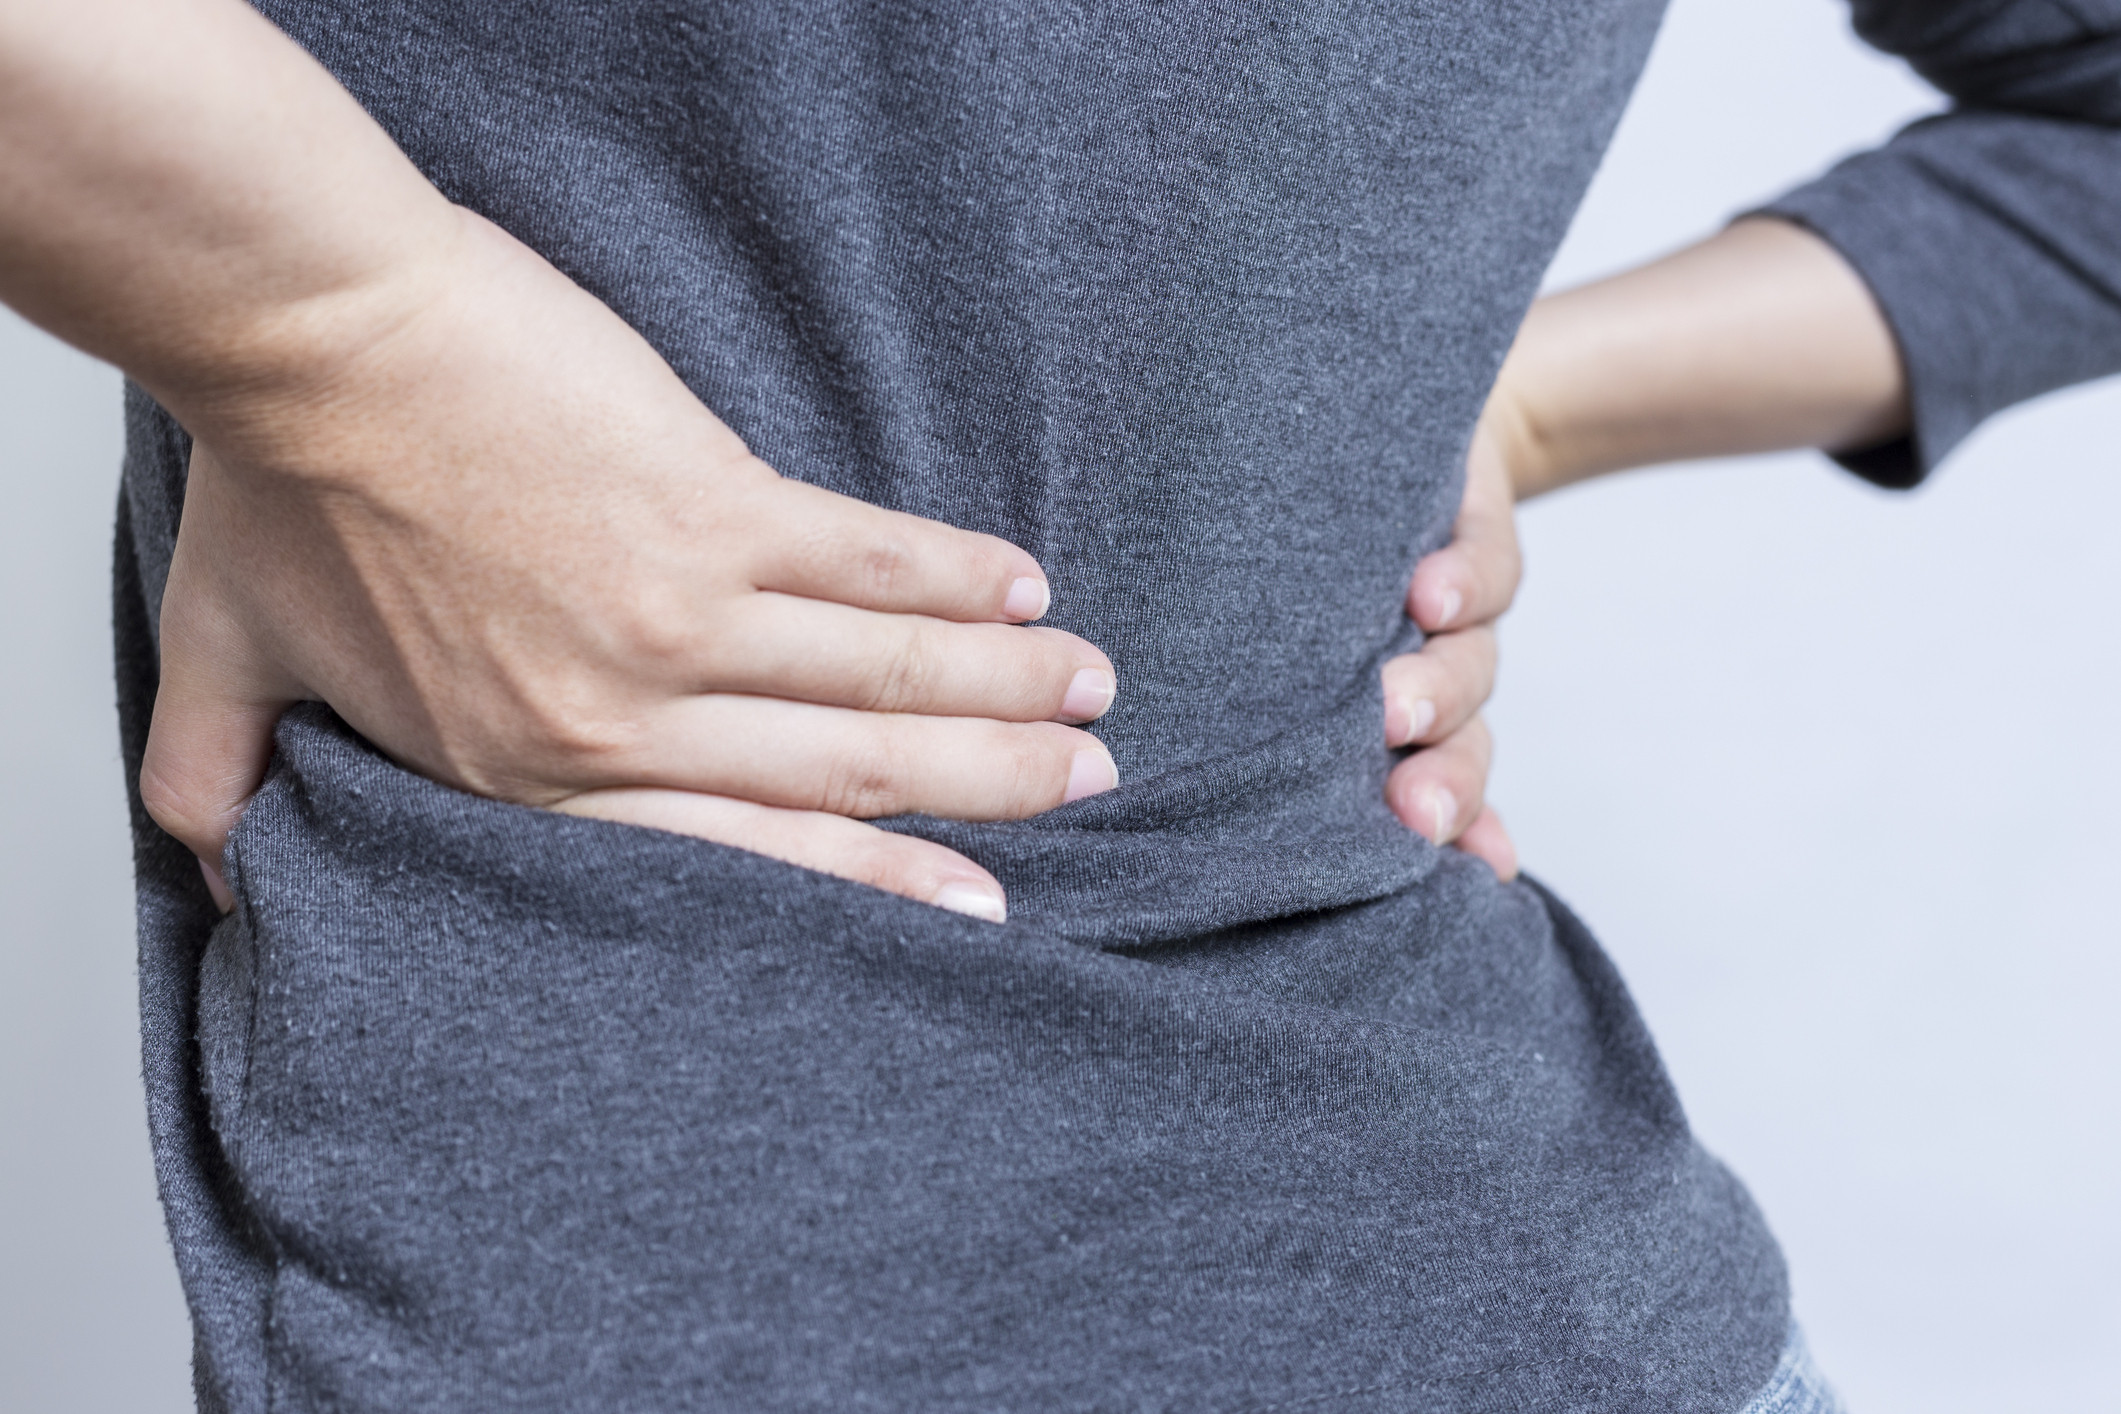 4 Easy Exercises to Reduce Pain in The Lower Back